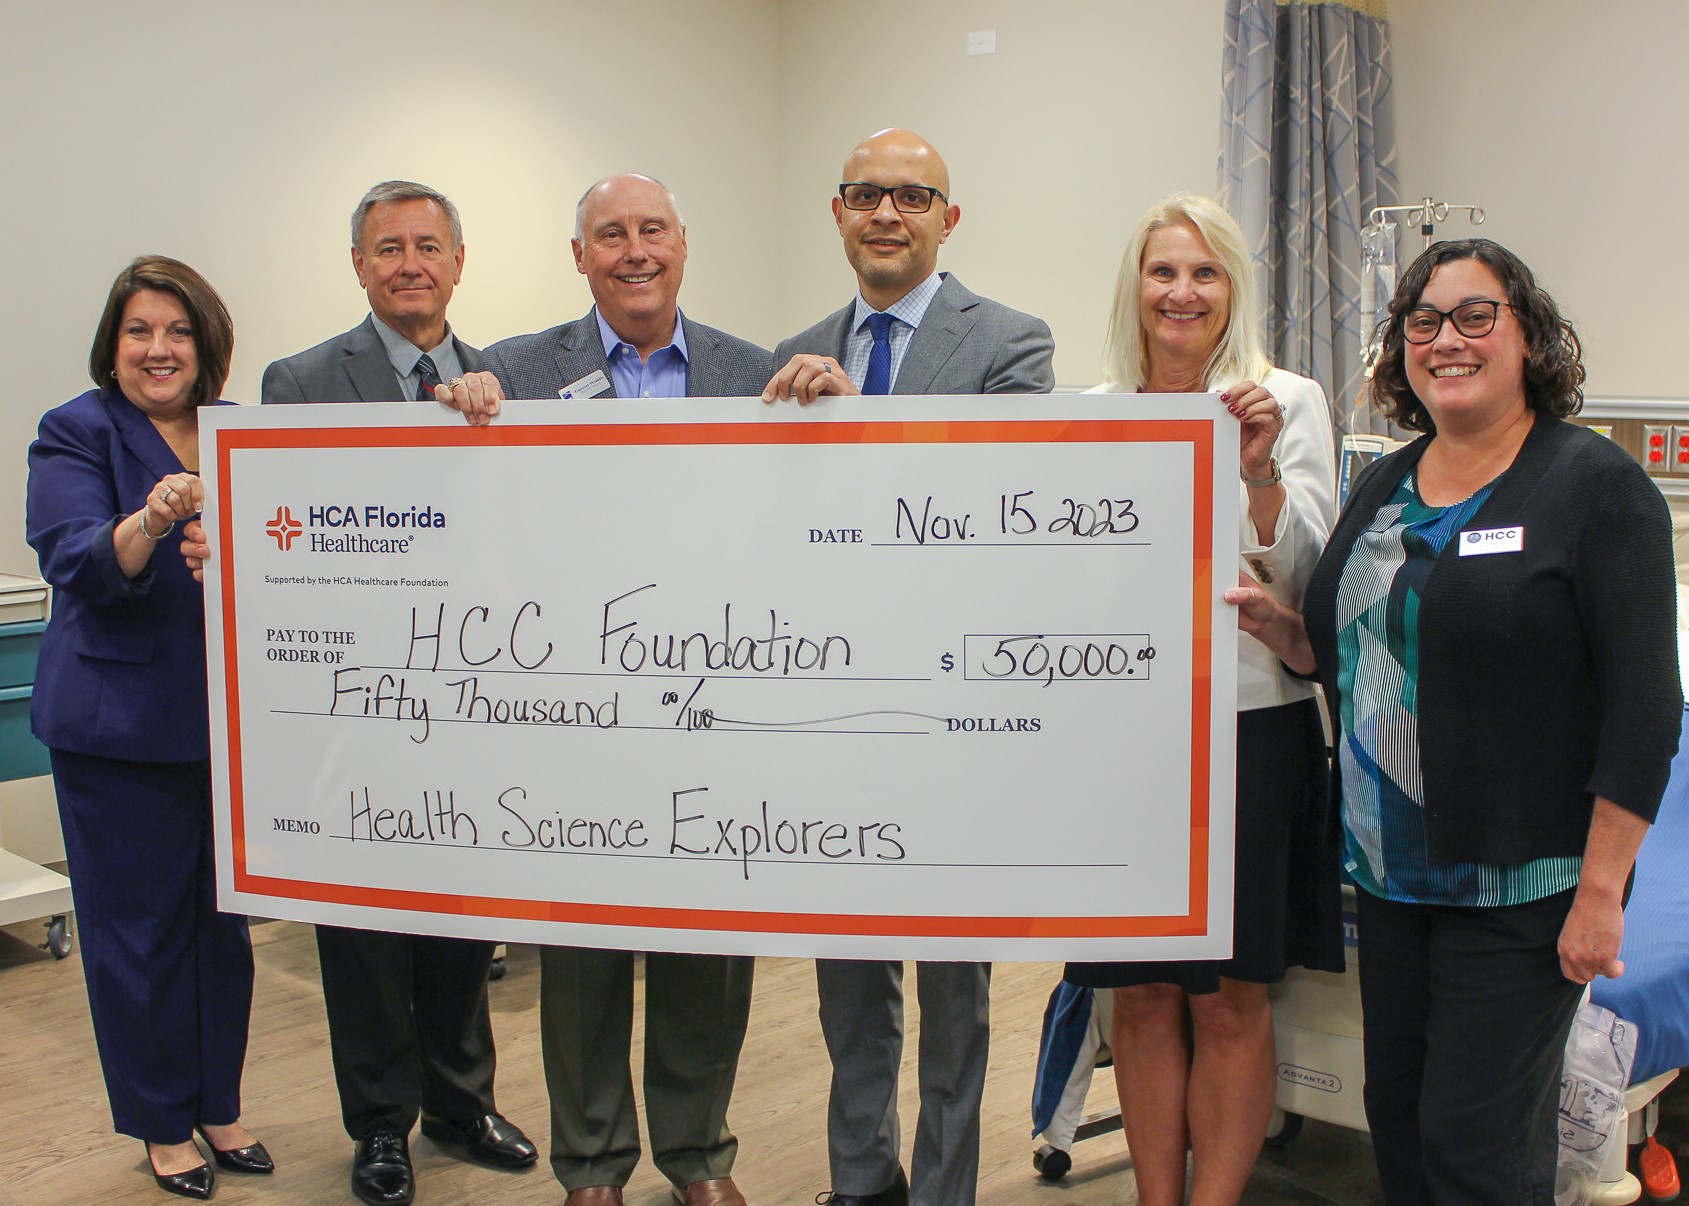 HCA staff pose with $50,000 check to the HCC FOundation.